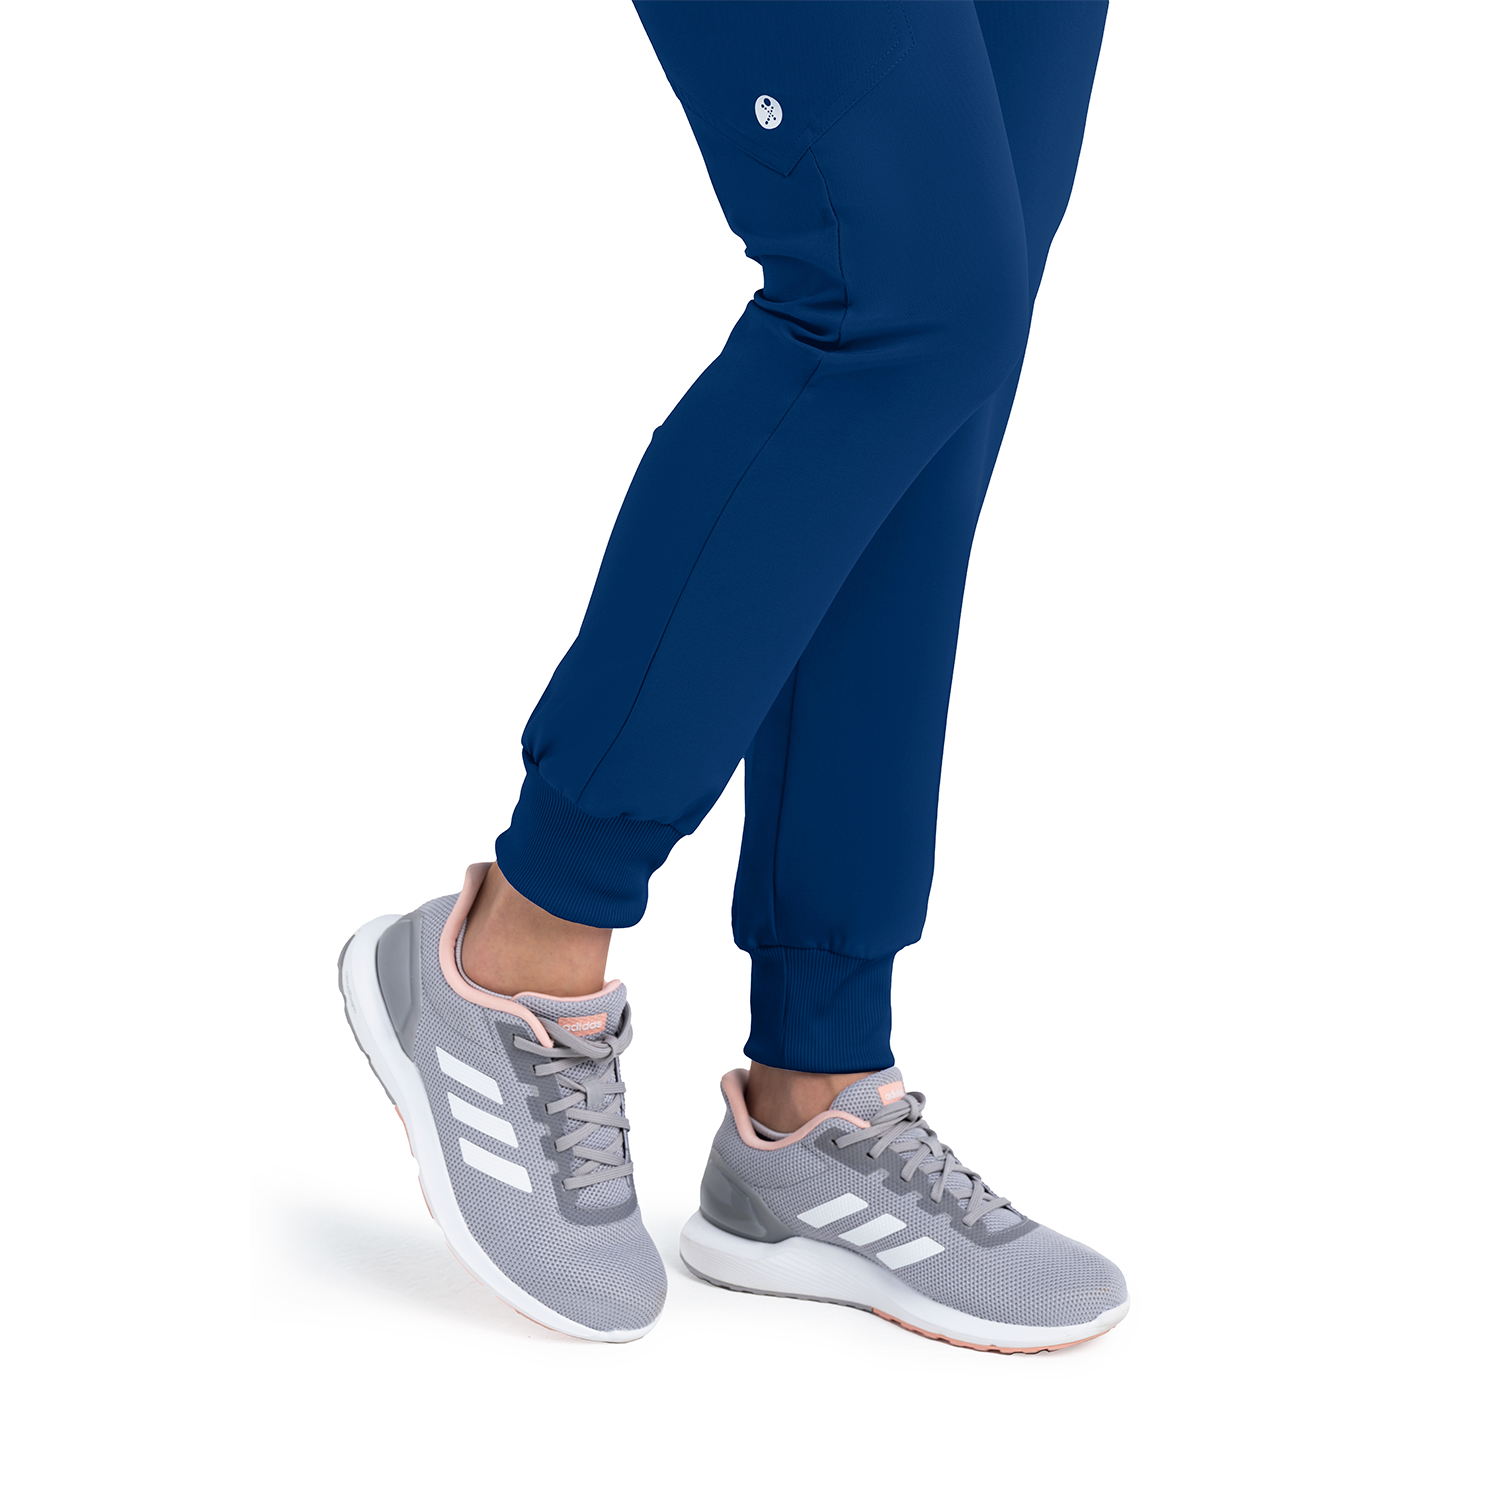 LIMITED EDITION LIFETHREADS WOMEN'S ACTIVE JOGGER PANT